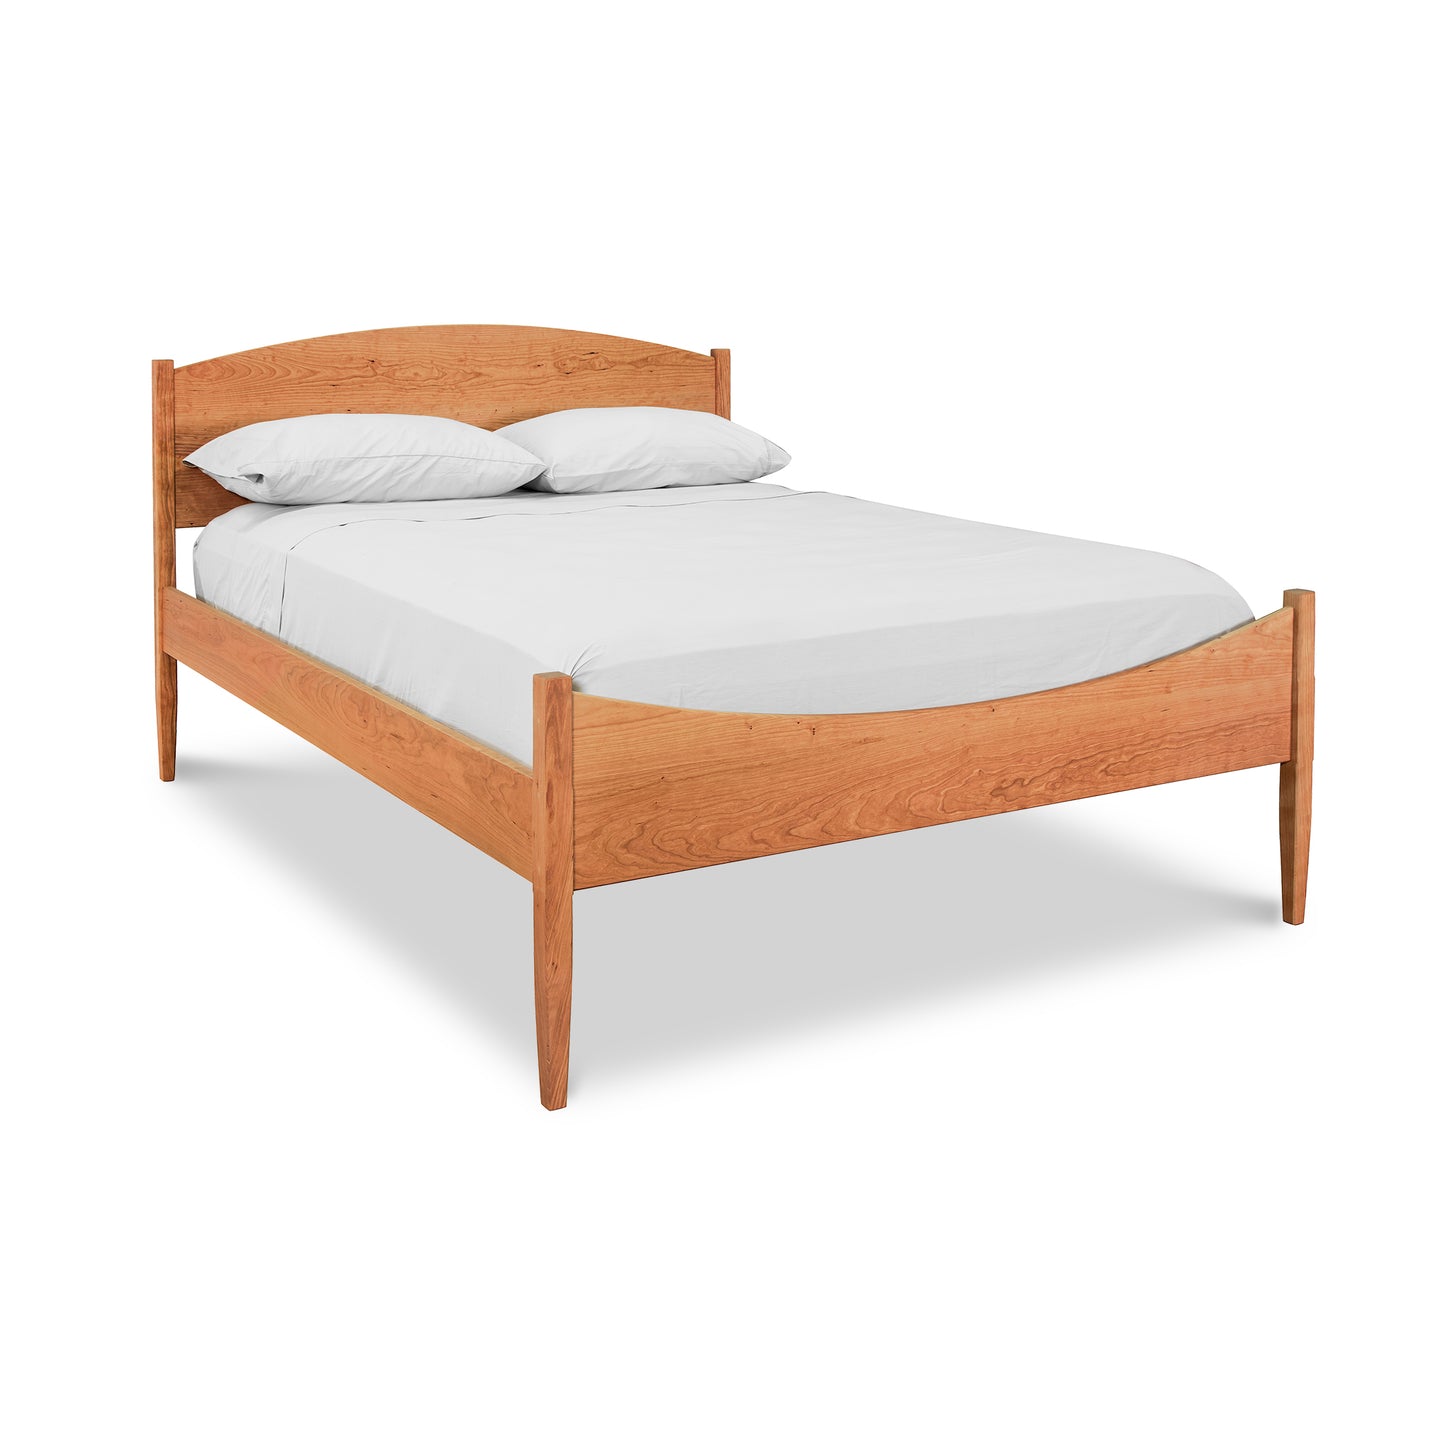 An eco-friendly Maple Corner Woodworks Vermont Shaker Moon Bed with a wooden frame and white sheets.